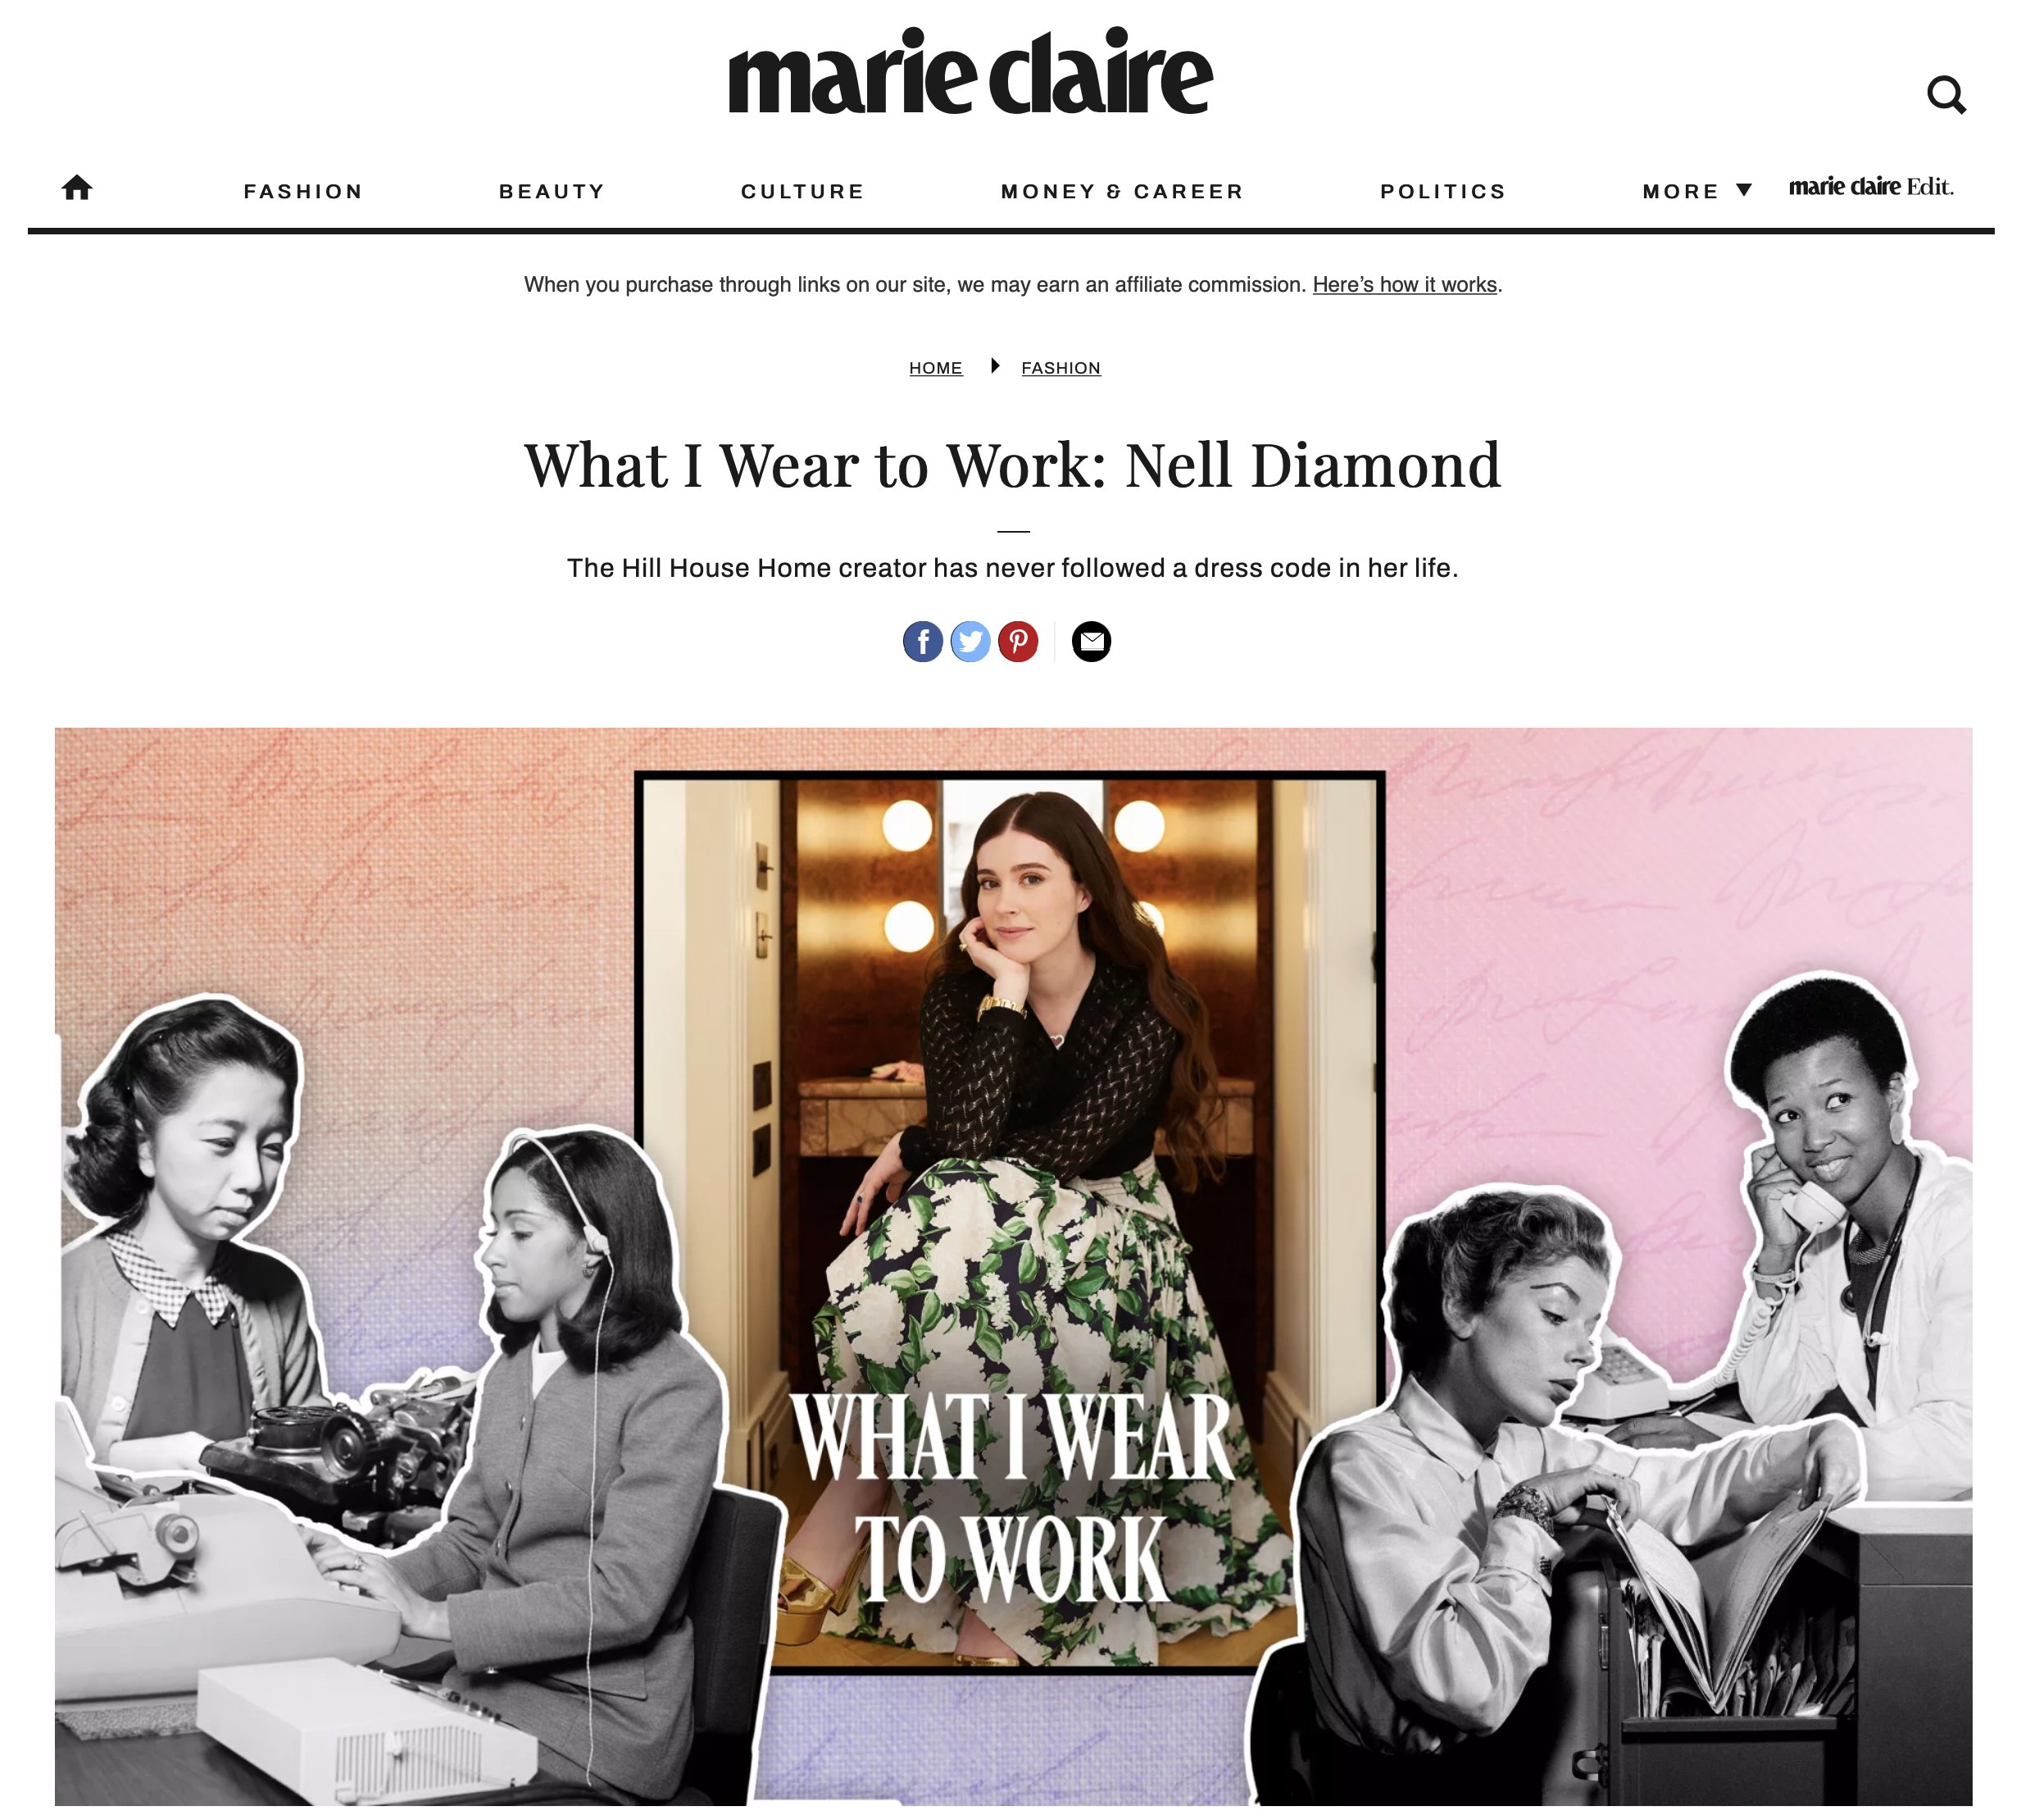 marie claire.jpg